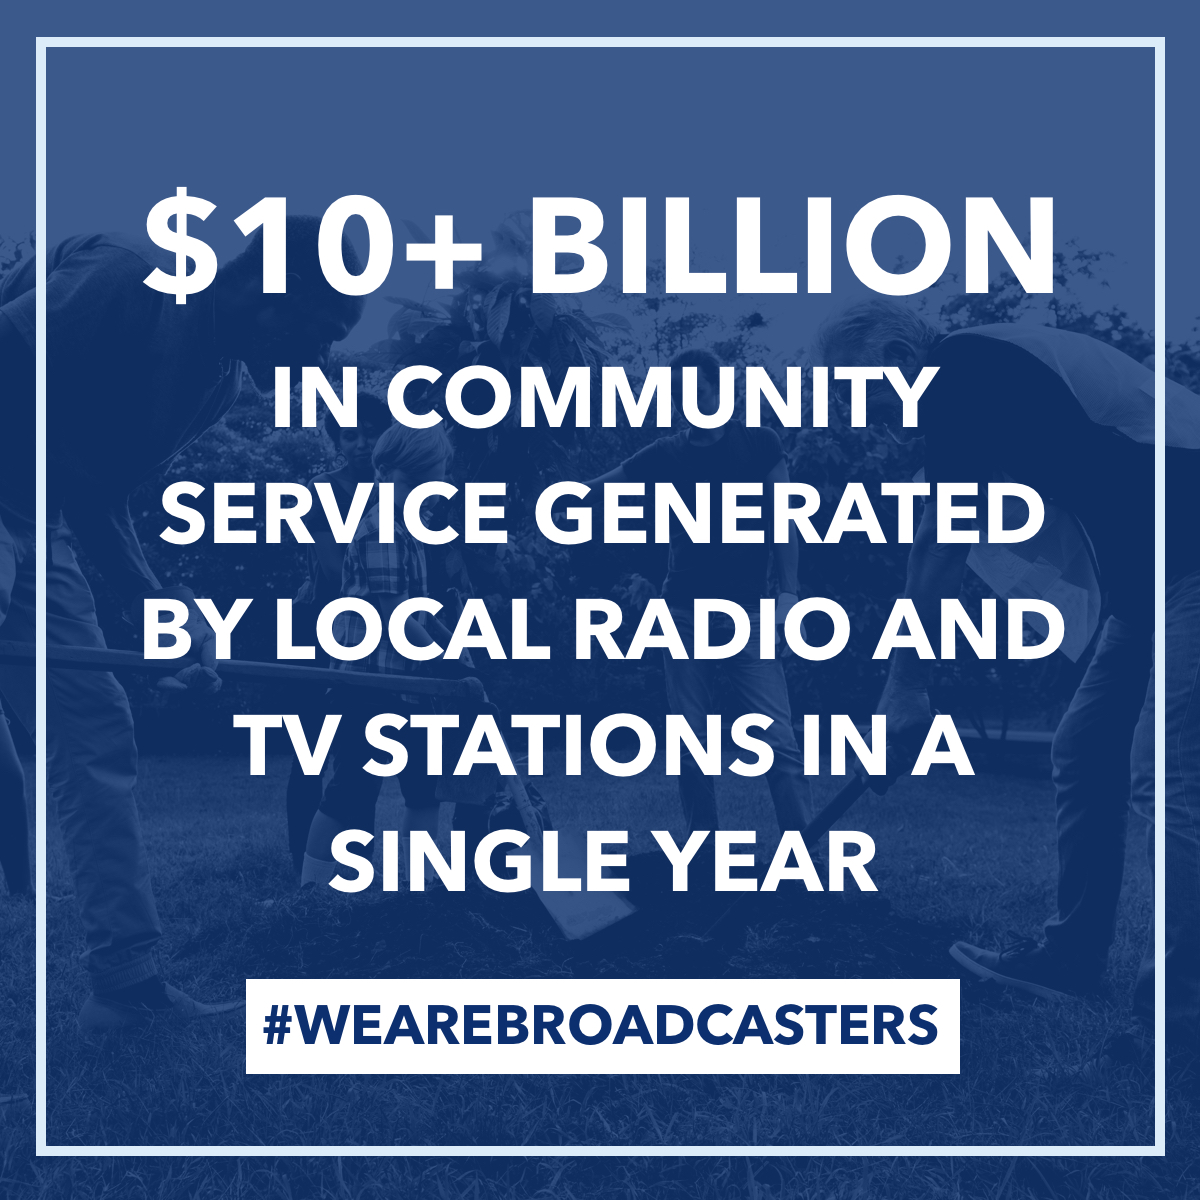 More than $10 billion is generated by local broadcasters in community service each year